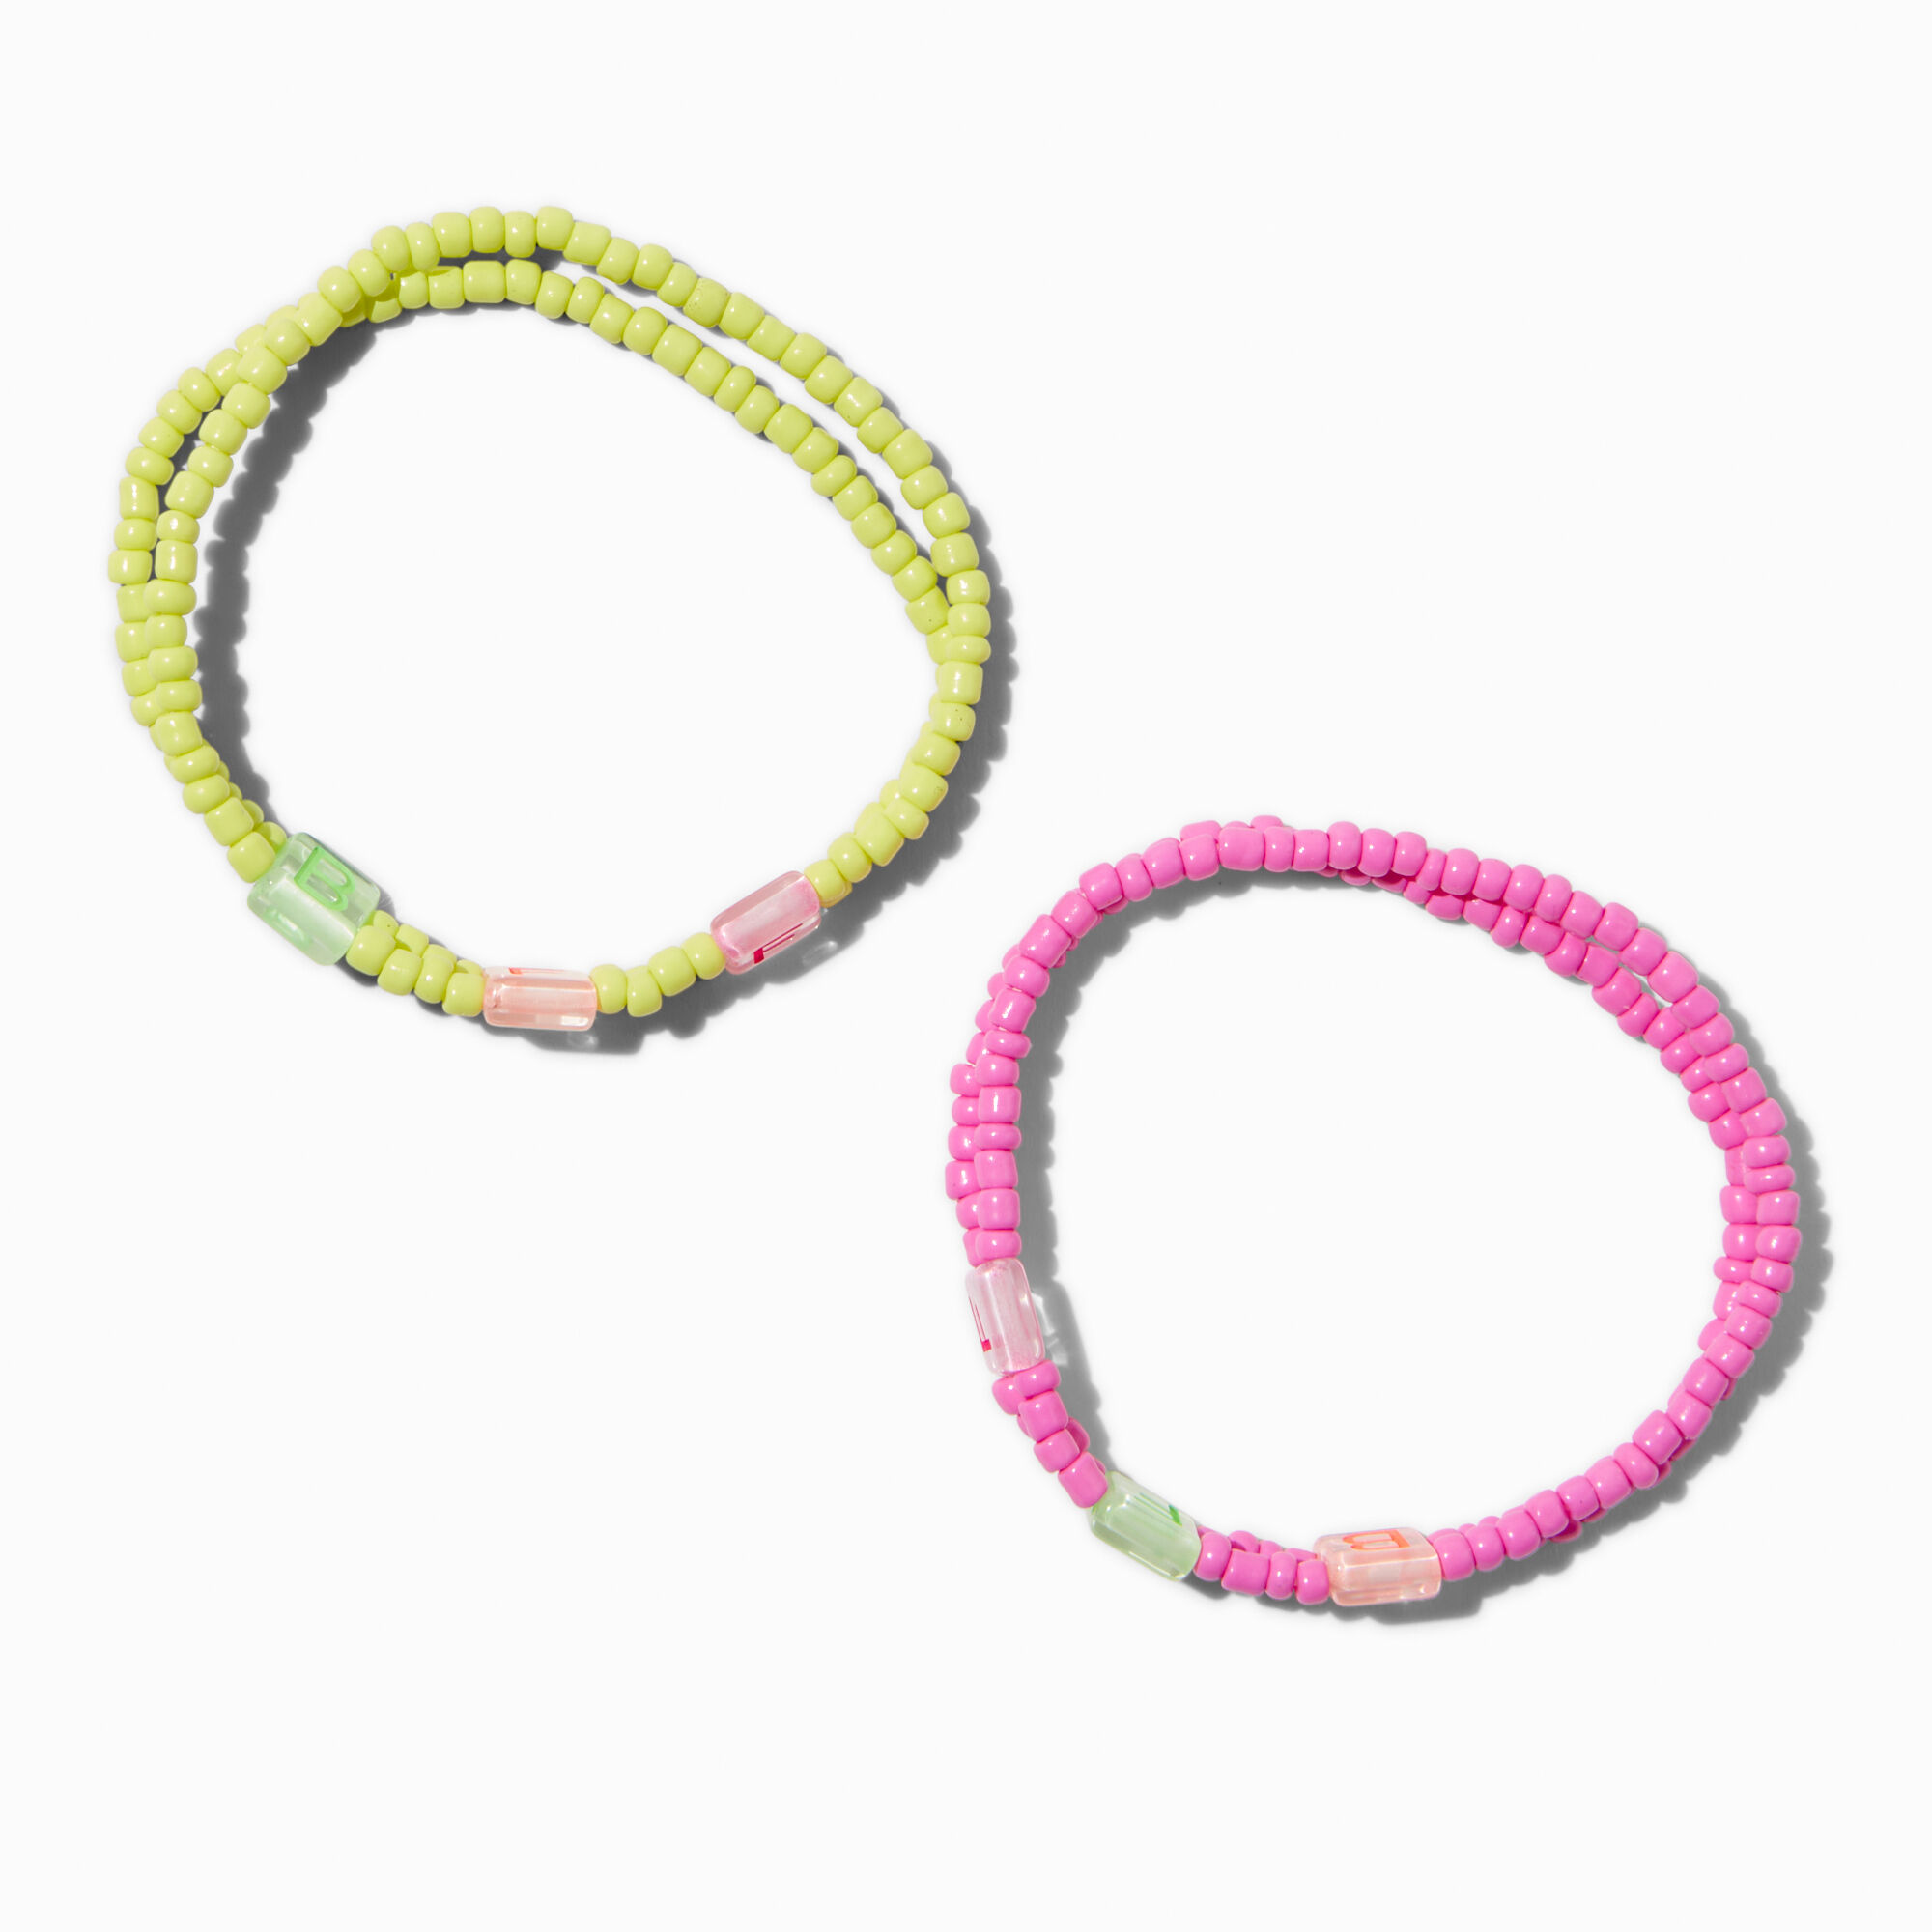 View Claires Best Friends Neon Beaded bff Stretch Bracelets 2 Pack information